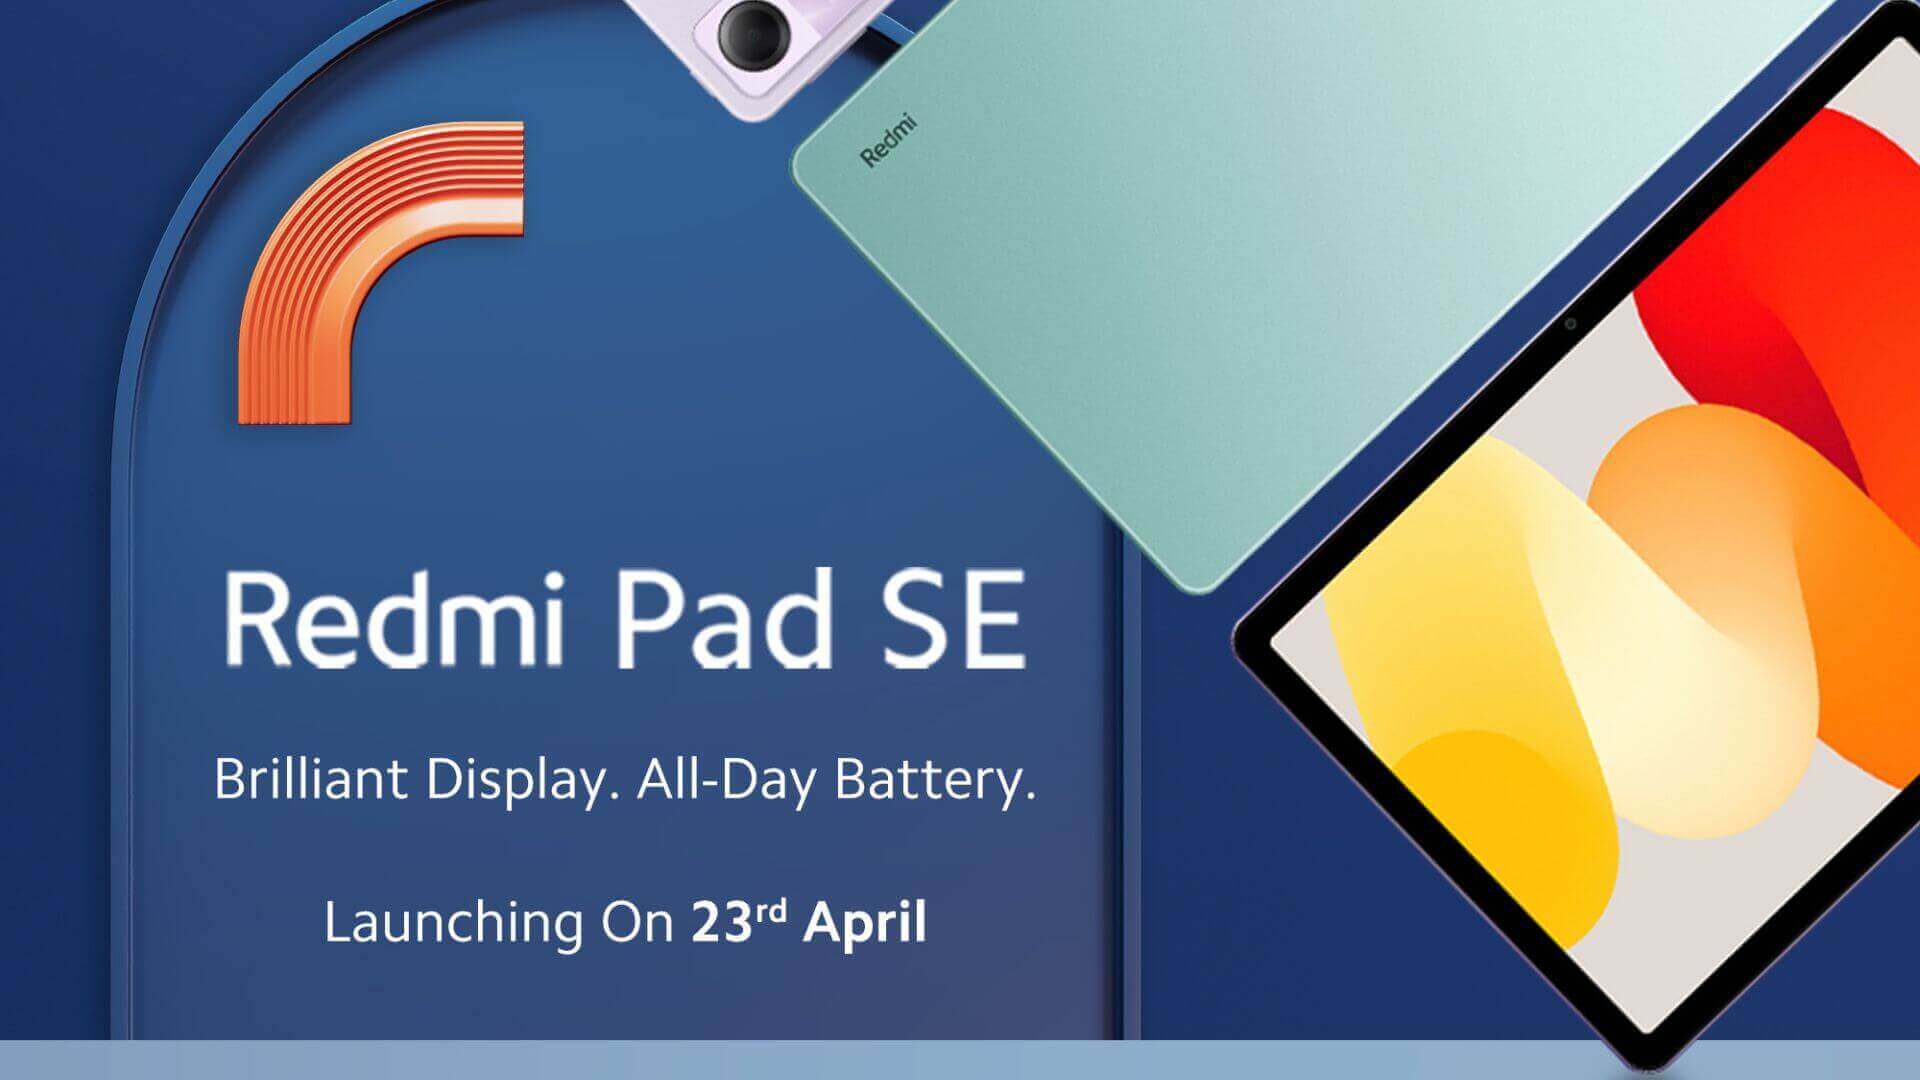 Redmi Pad SE to Hit Indian Markets on April 23